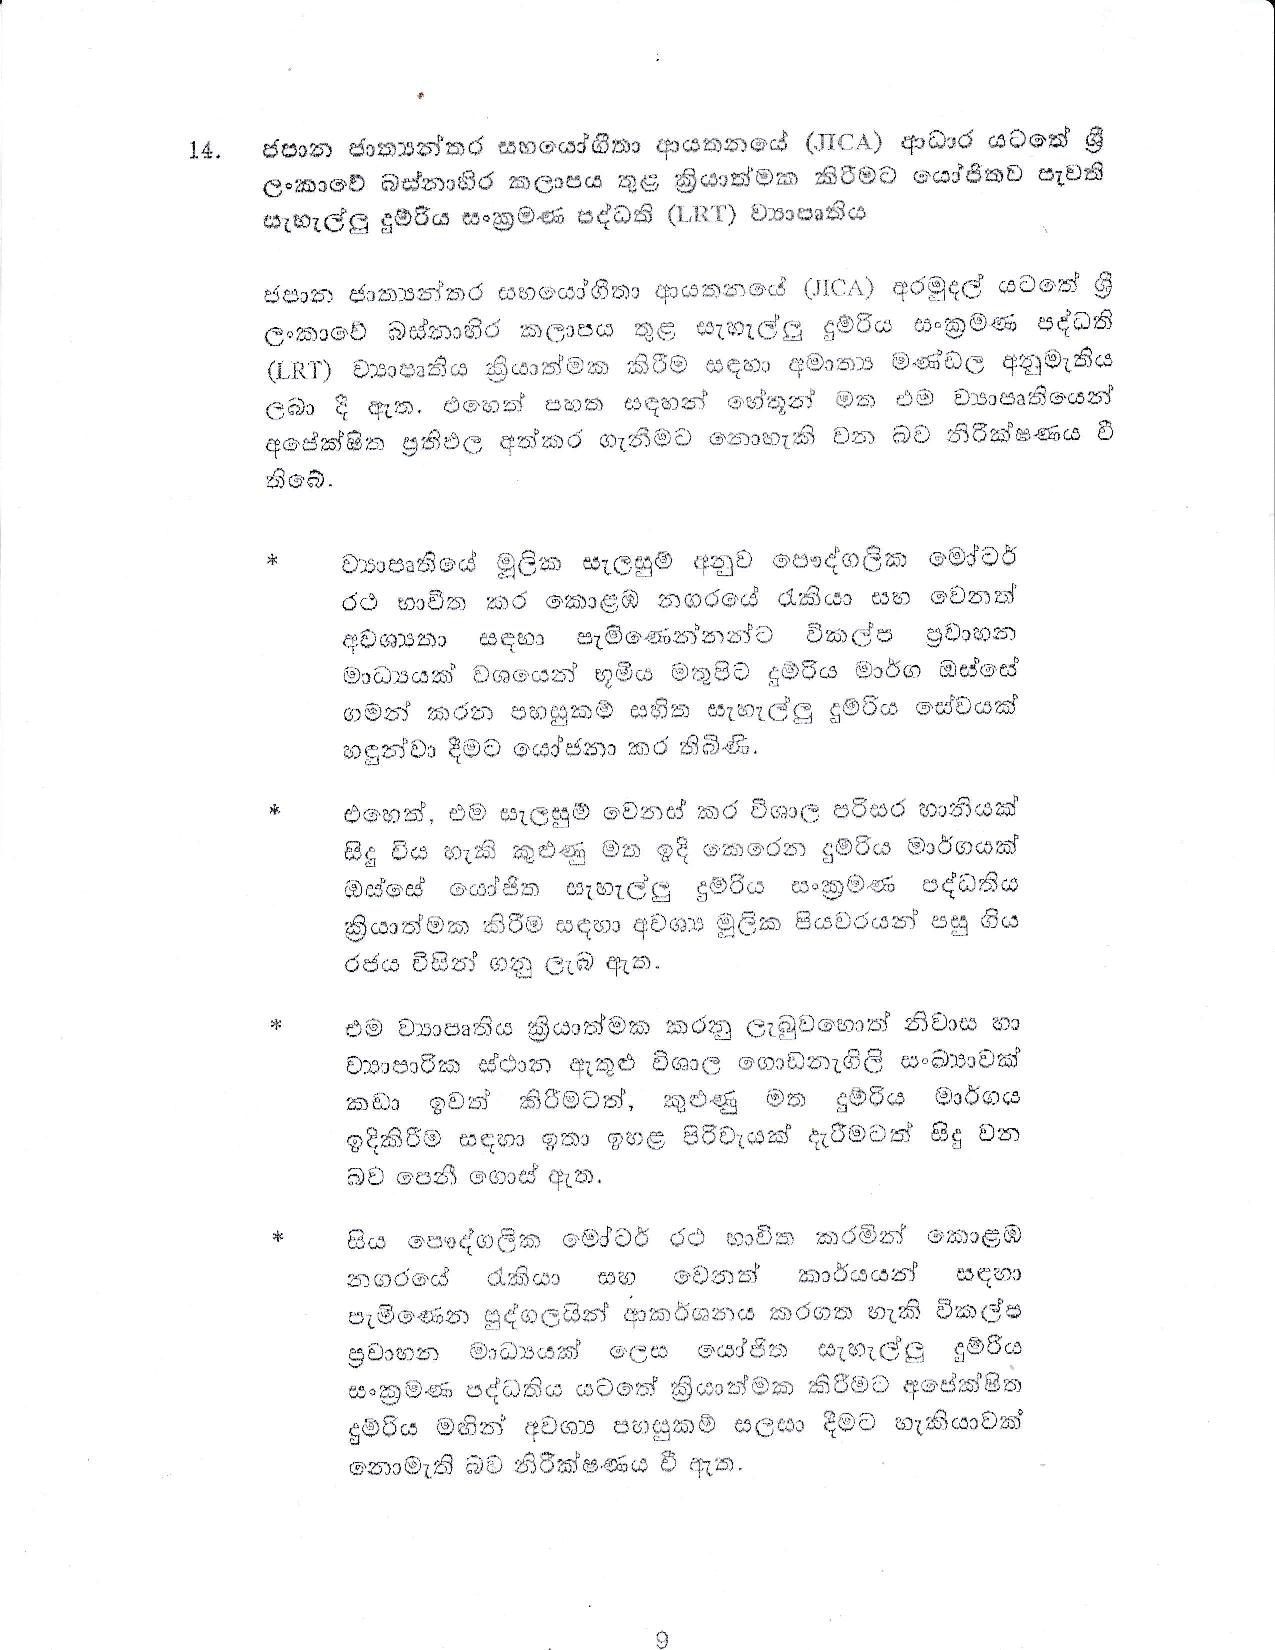 Cabinet Decision on 28.09.2020 page 009